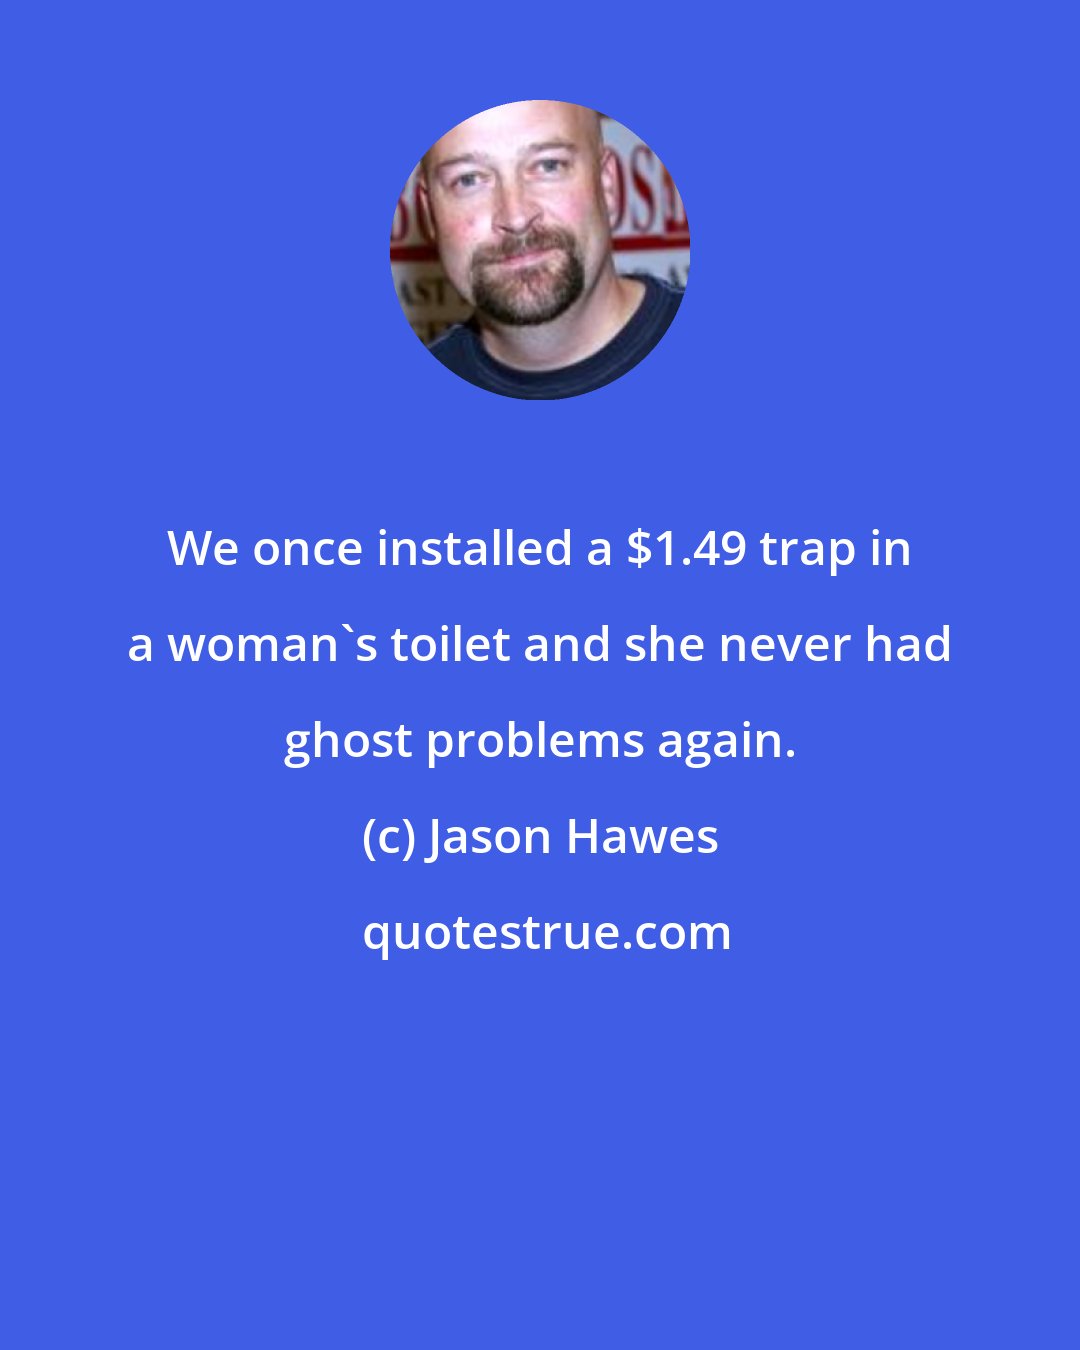 Jason Hawes: We once installed a $1.49 trap in a woman's toilet and she never had ghost problems again.